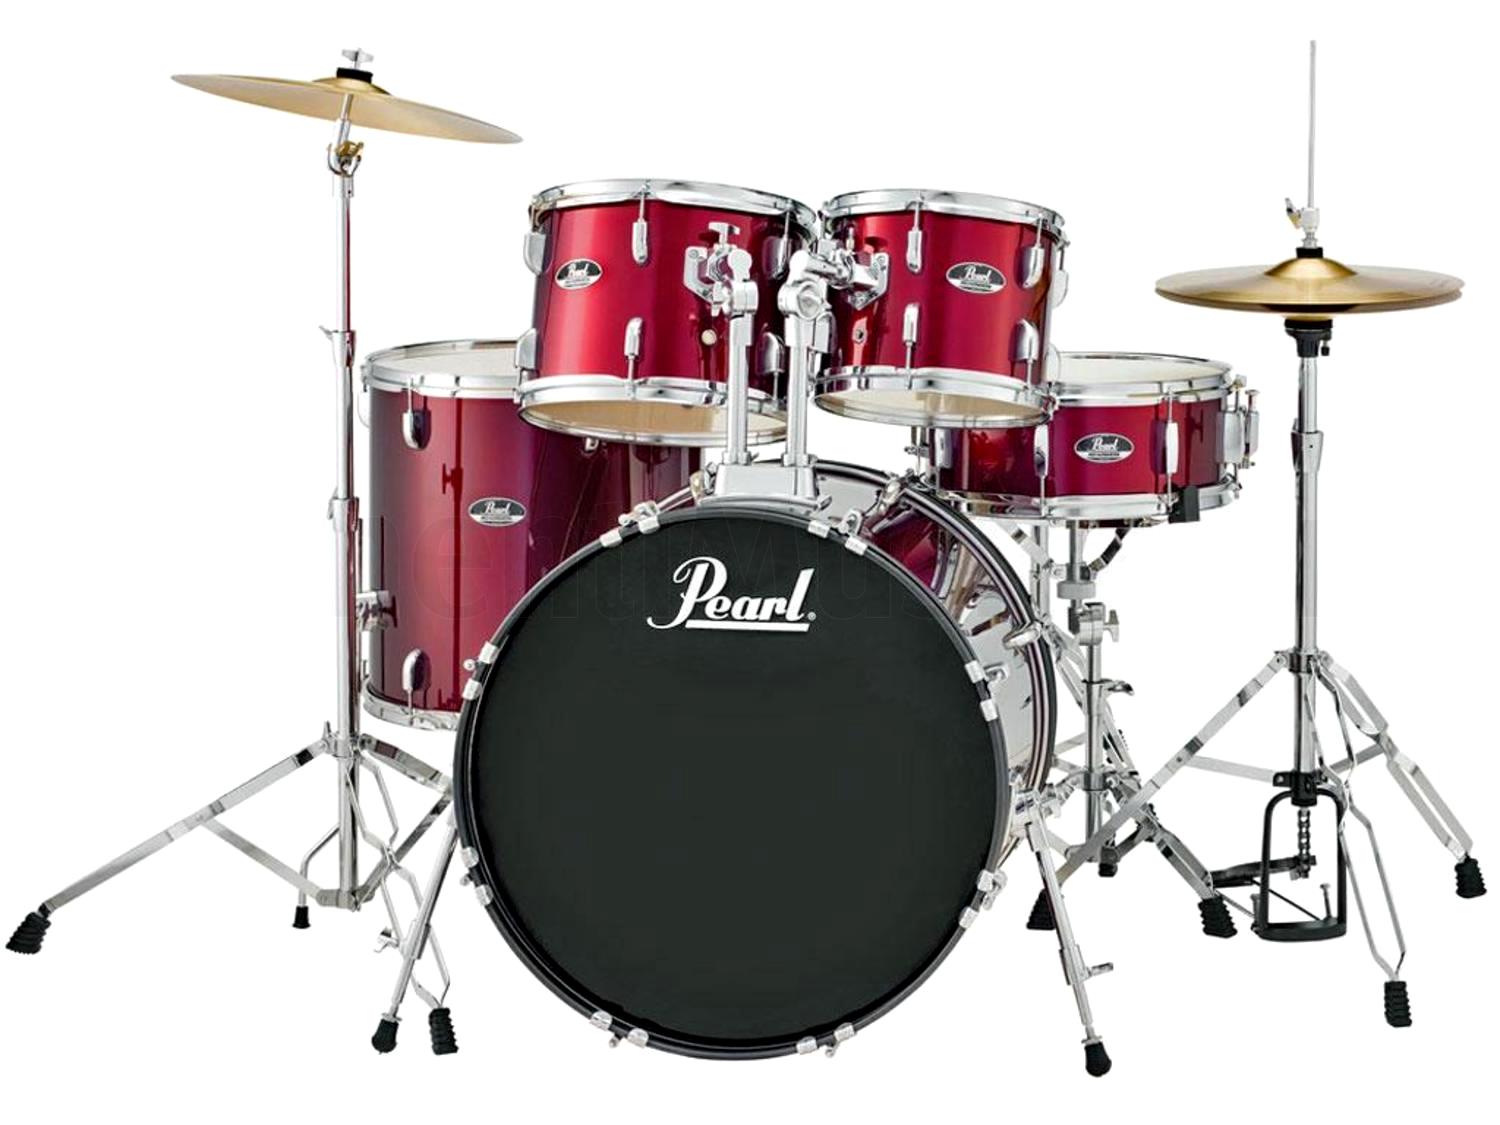 Pearl Drums batteria acustica RS525SC/C91 Roadshow Fusion Wine Red